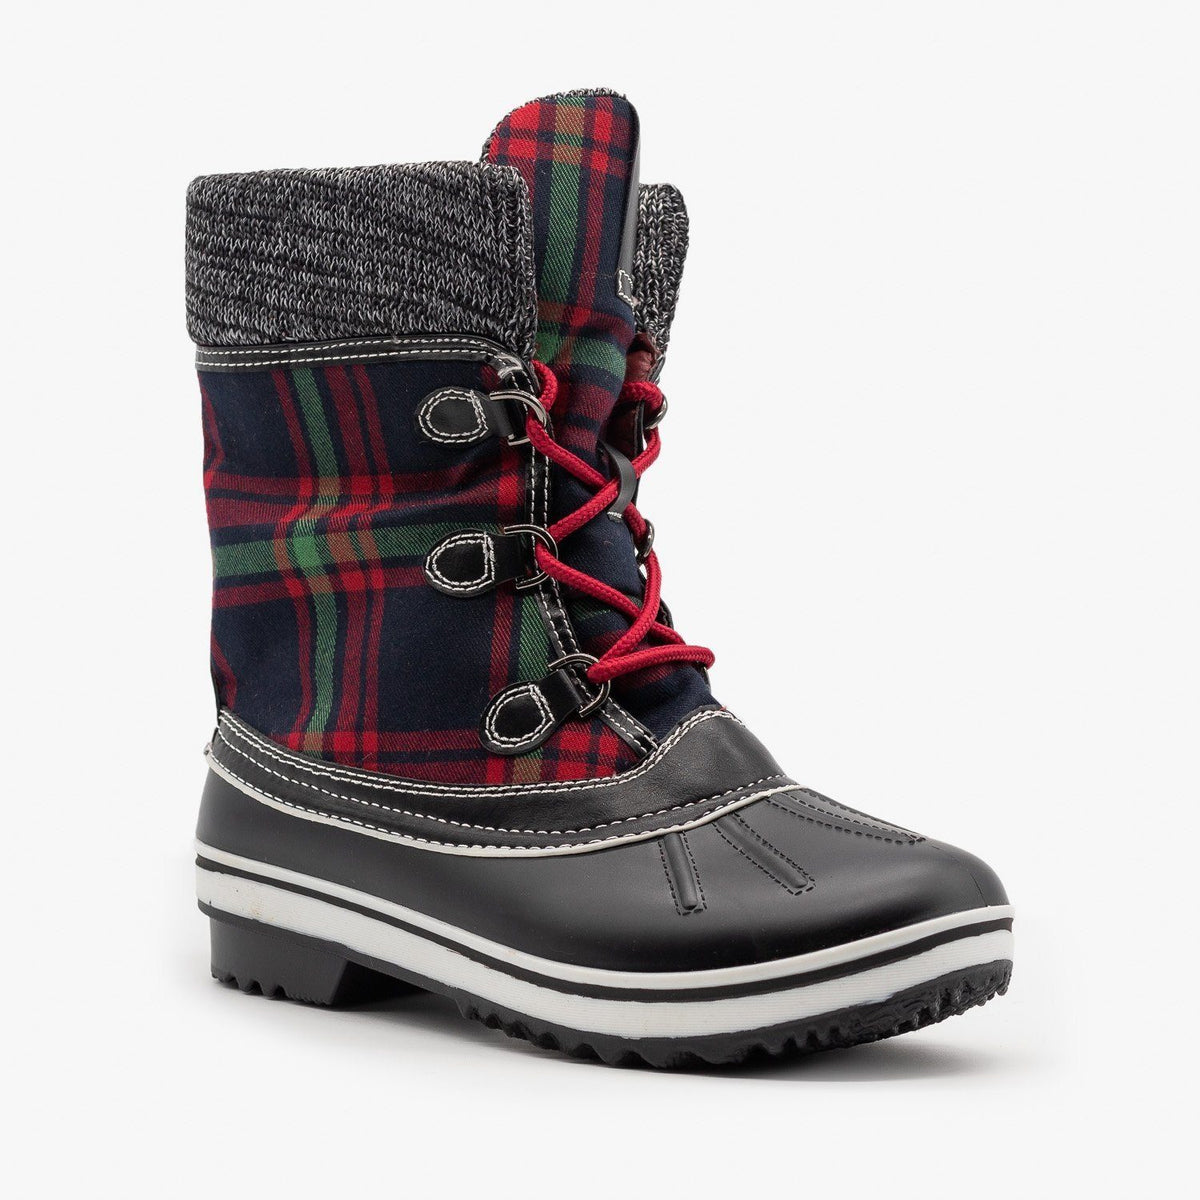 Cozy Plaid Winter Boots - Forever Shoes 